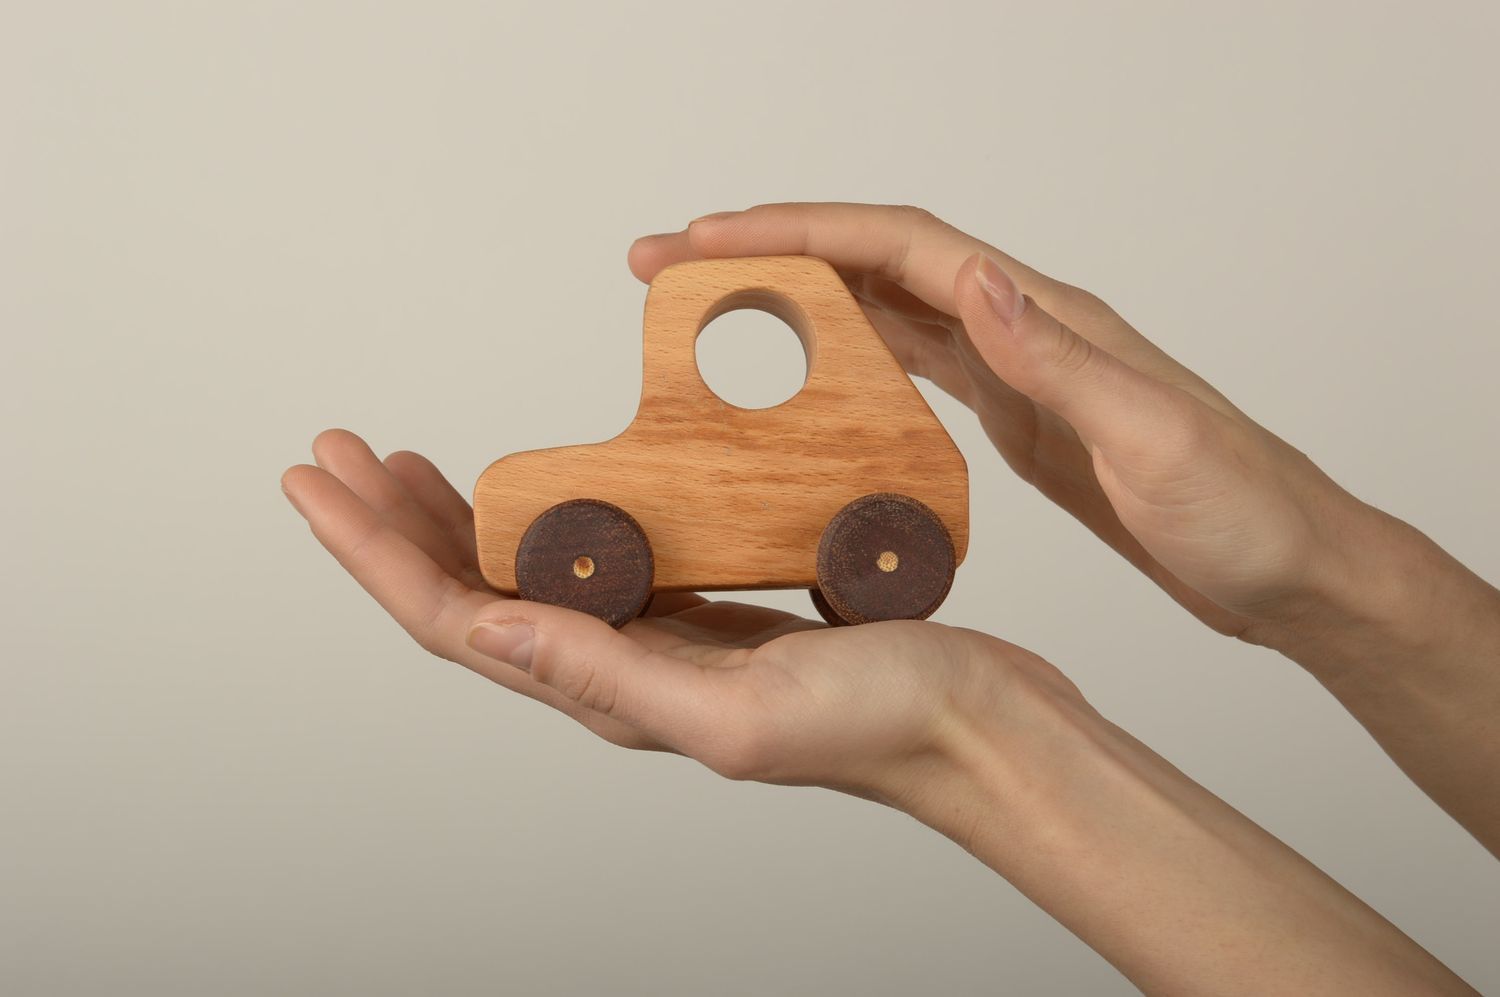 Handmade wooden toy wheeled toy best toys for kids wood craft gifts for kids photo 1